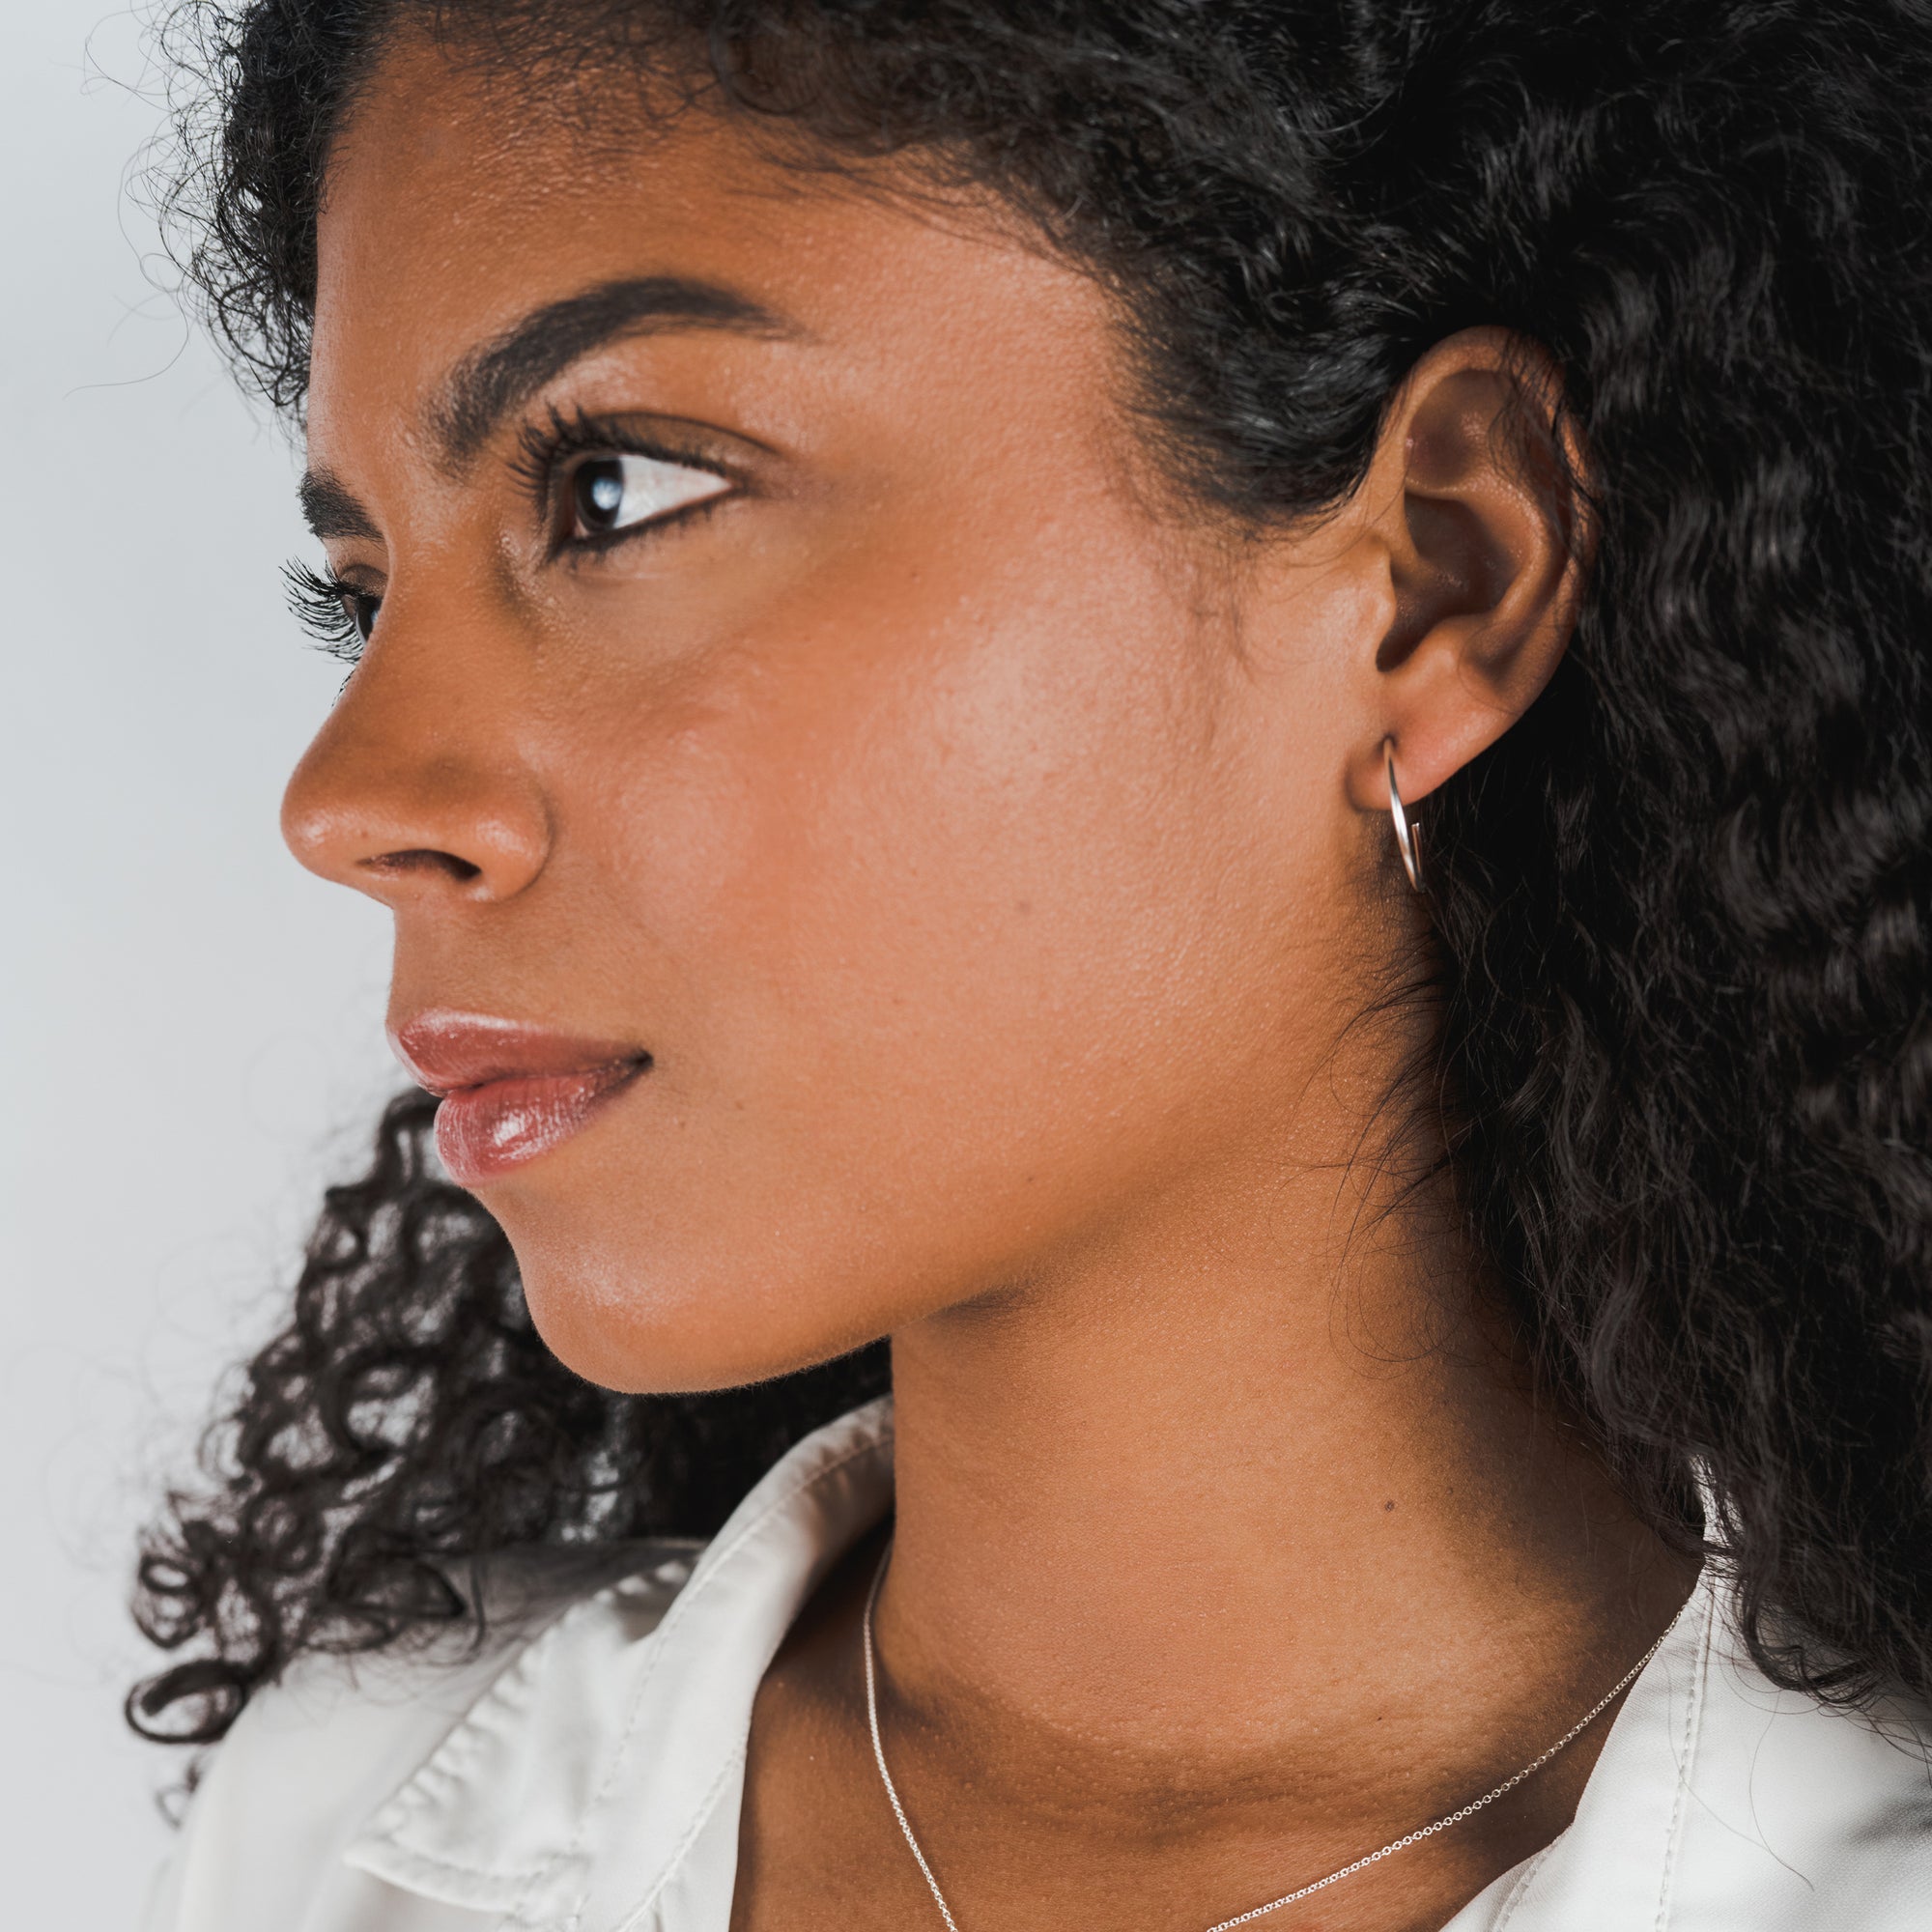 Profile of a woman with curly hair wearing Becoming Jewelry&#39;s Open Hoop Earrings, large, looking to the side against a light background.